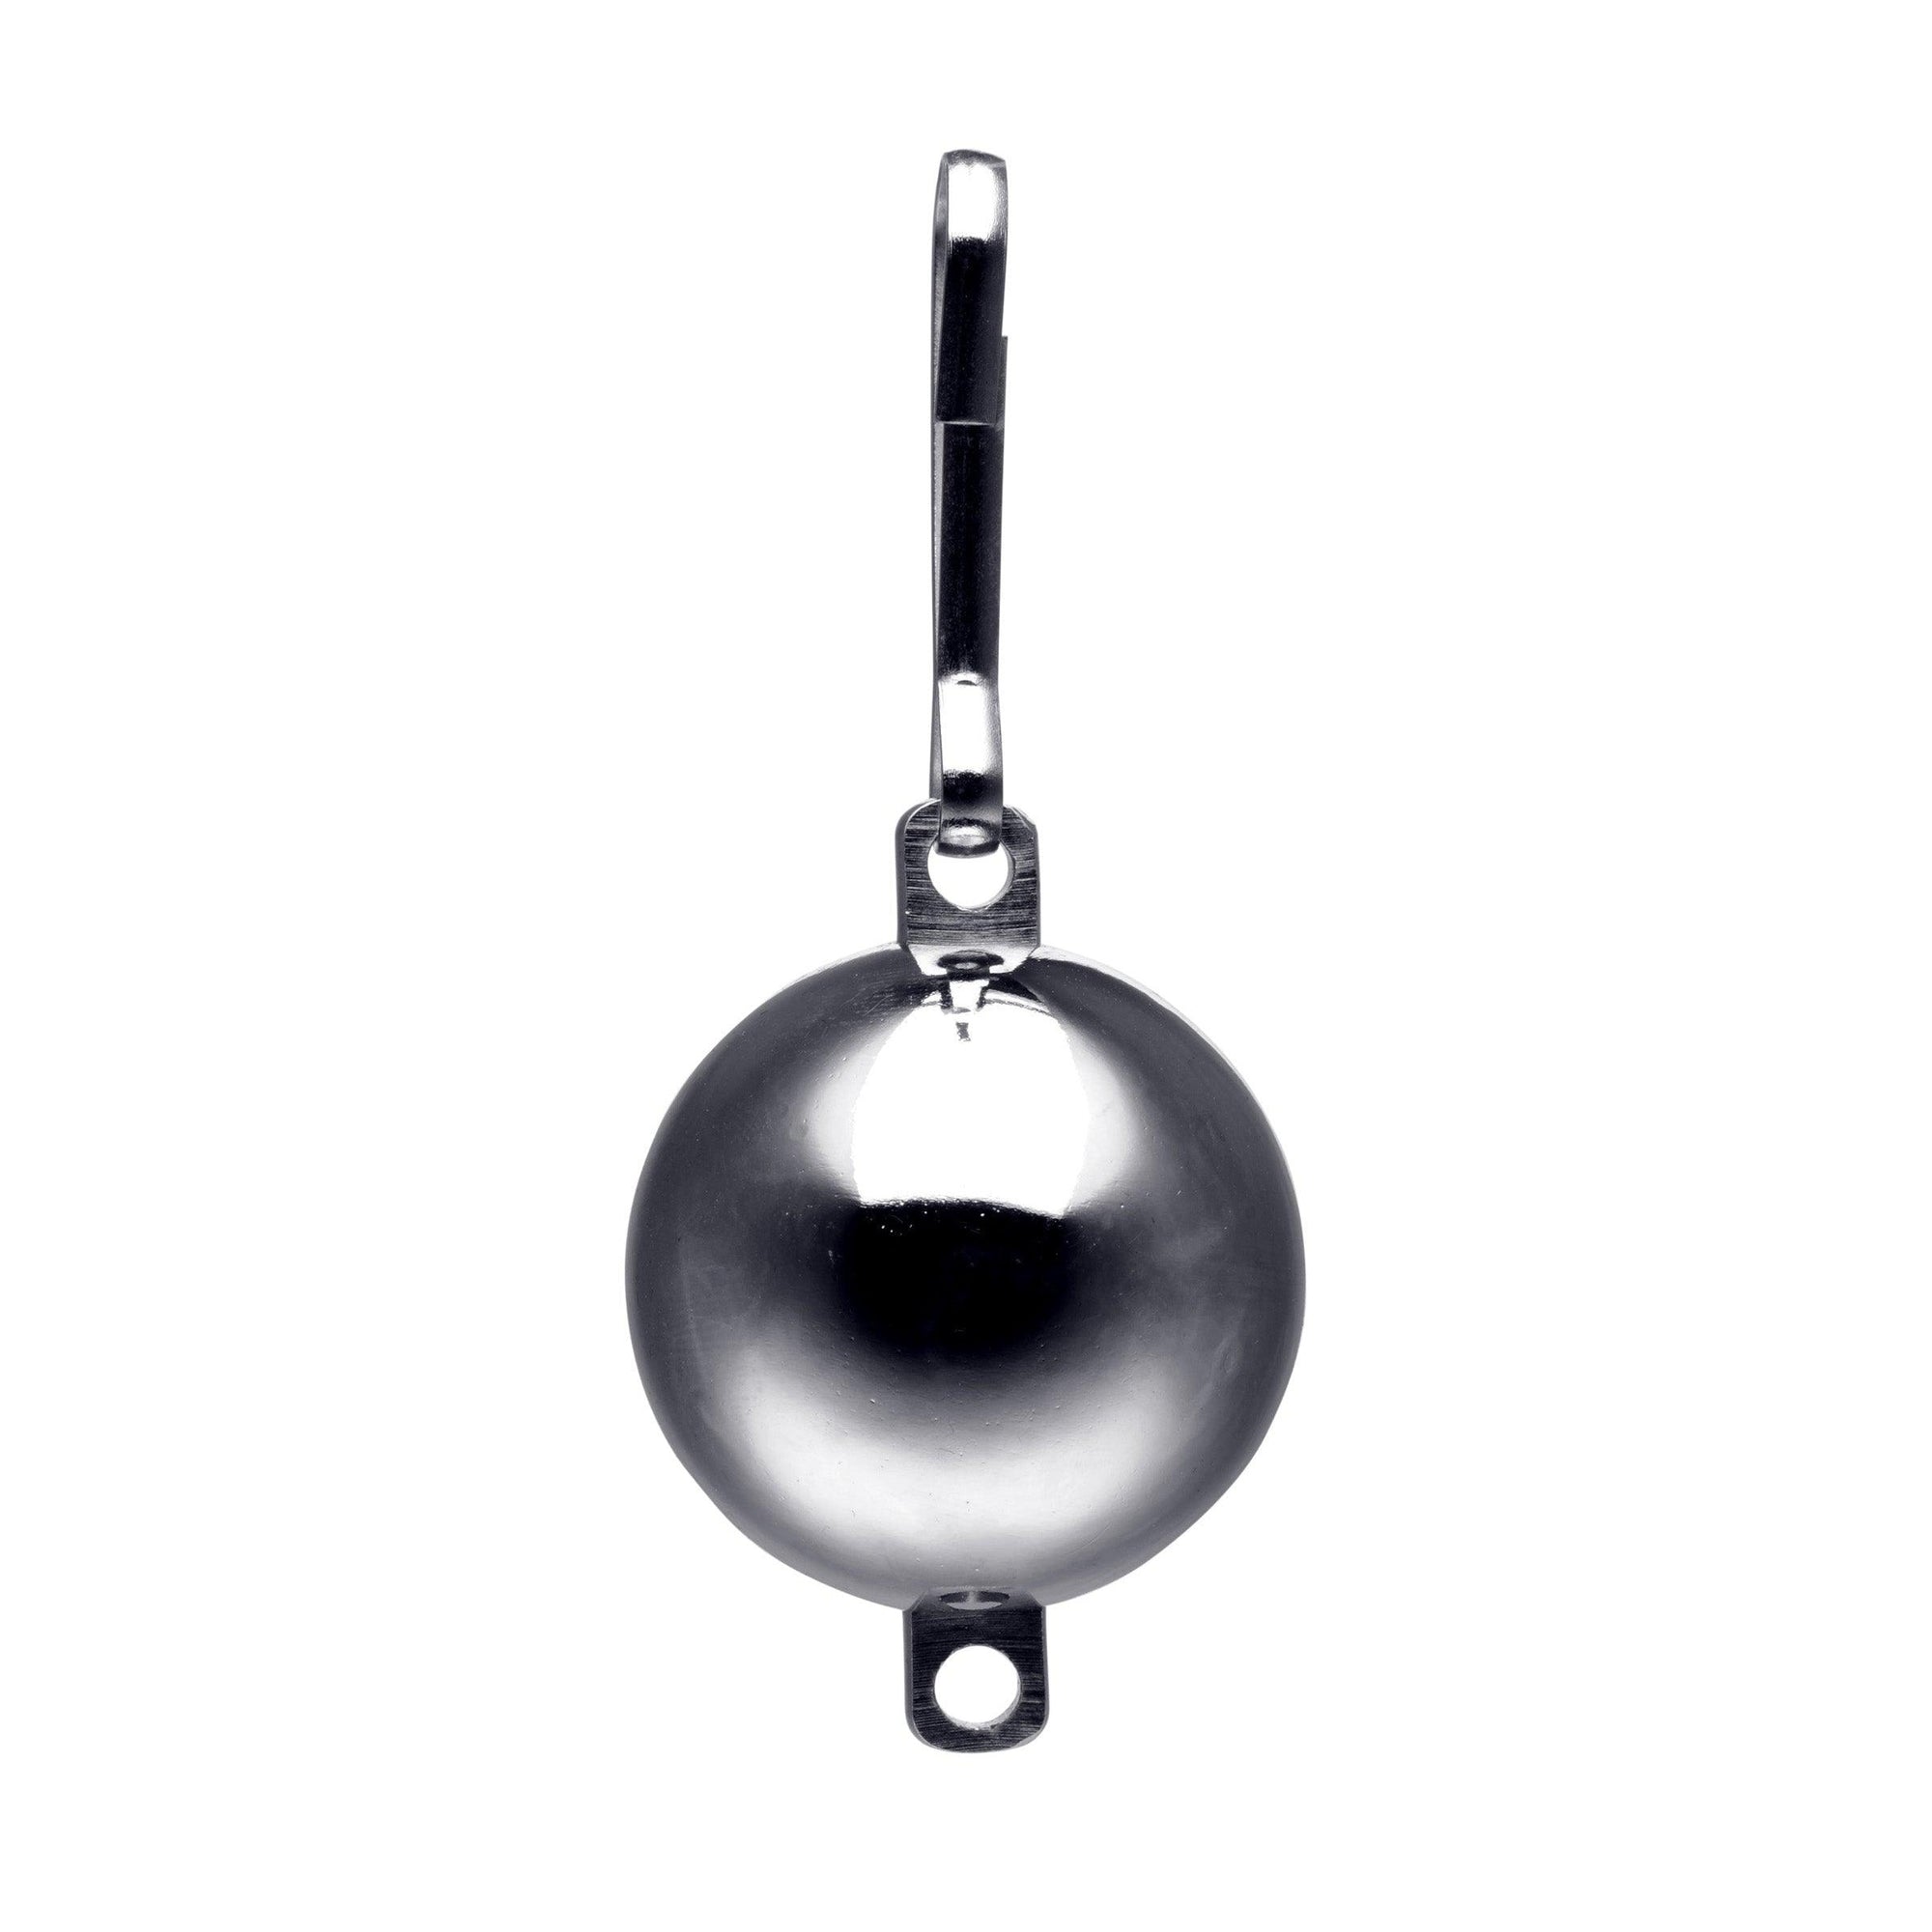 Interlocking 8 Oz Ball Weight with Connection Point